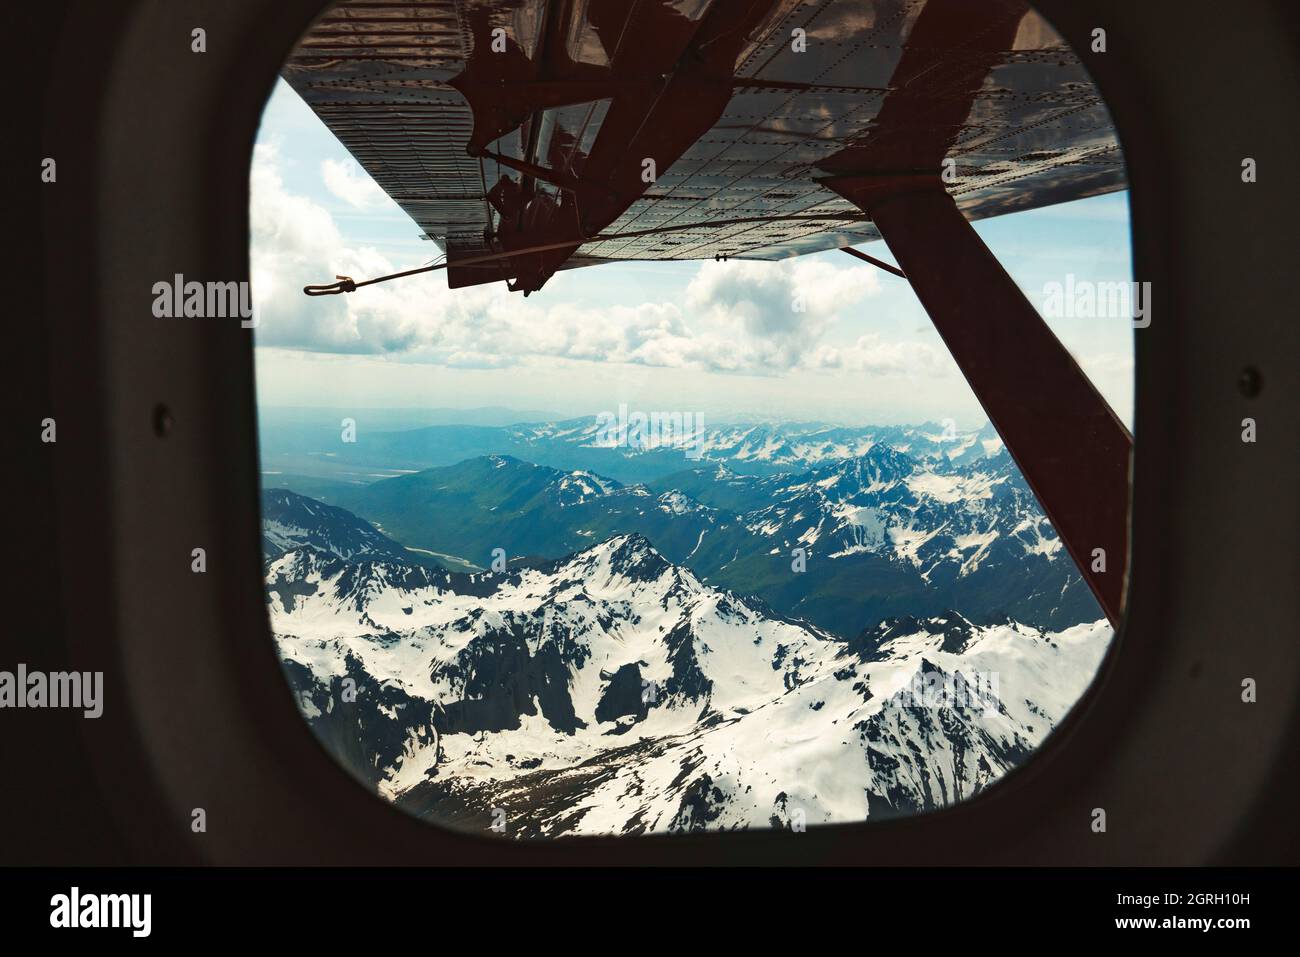 An airplane wing is seen out the window of a small plane with mountains in the distance Stock Photo